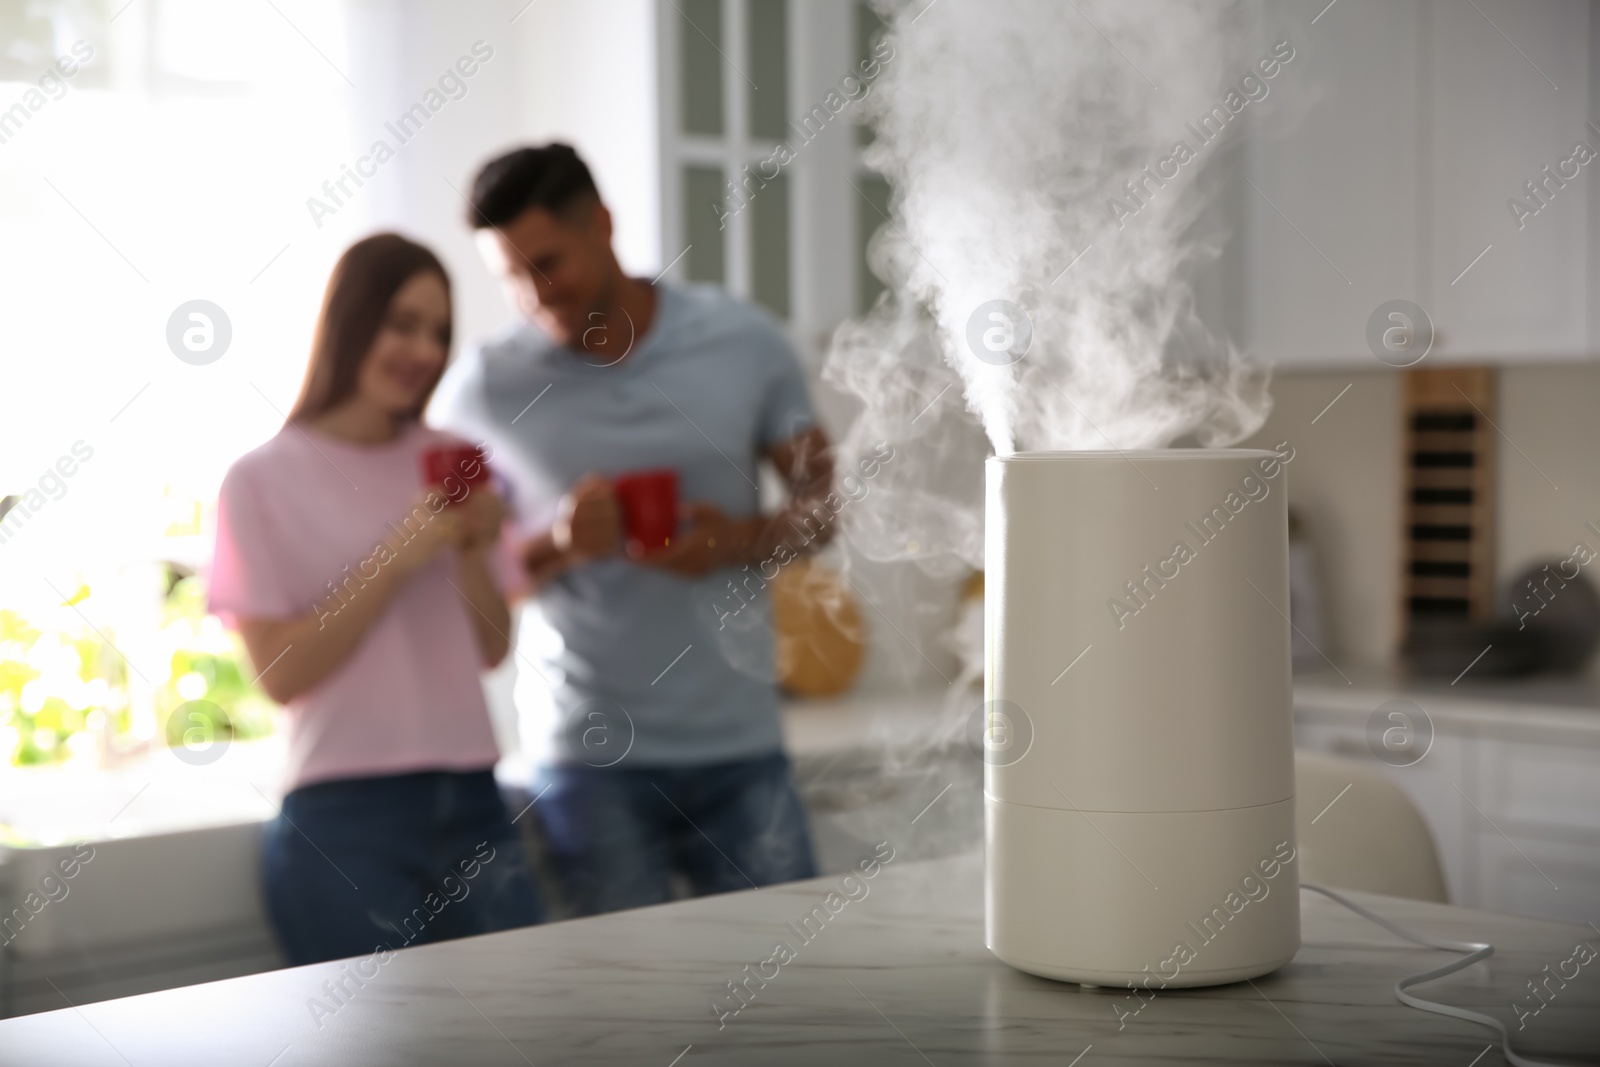 Photo of Modern air humidifier and blurred couple in kitchen